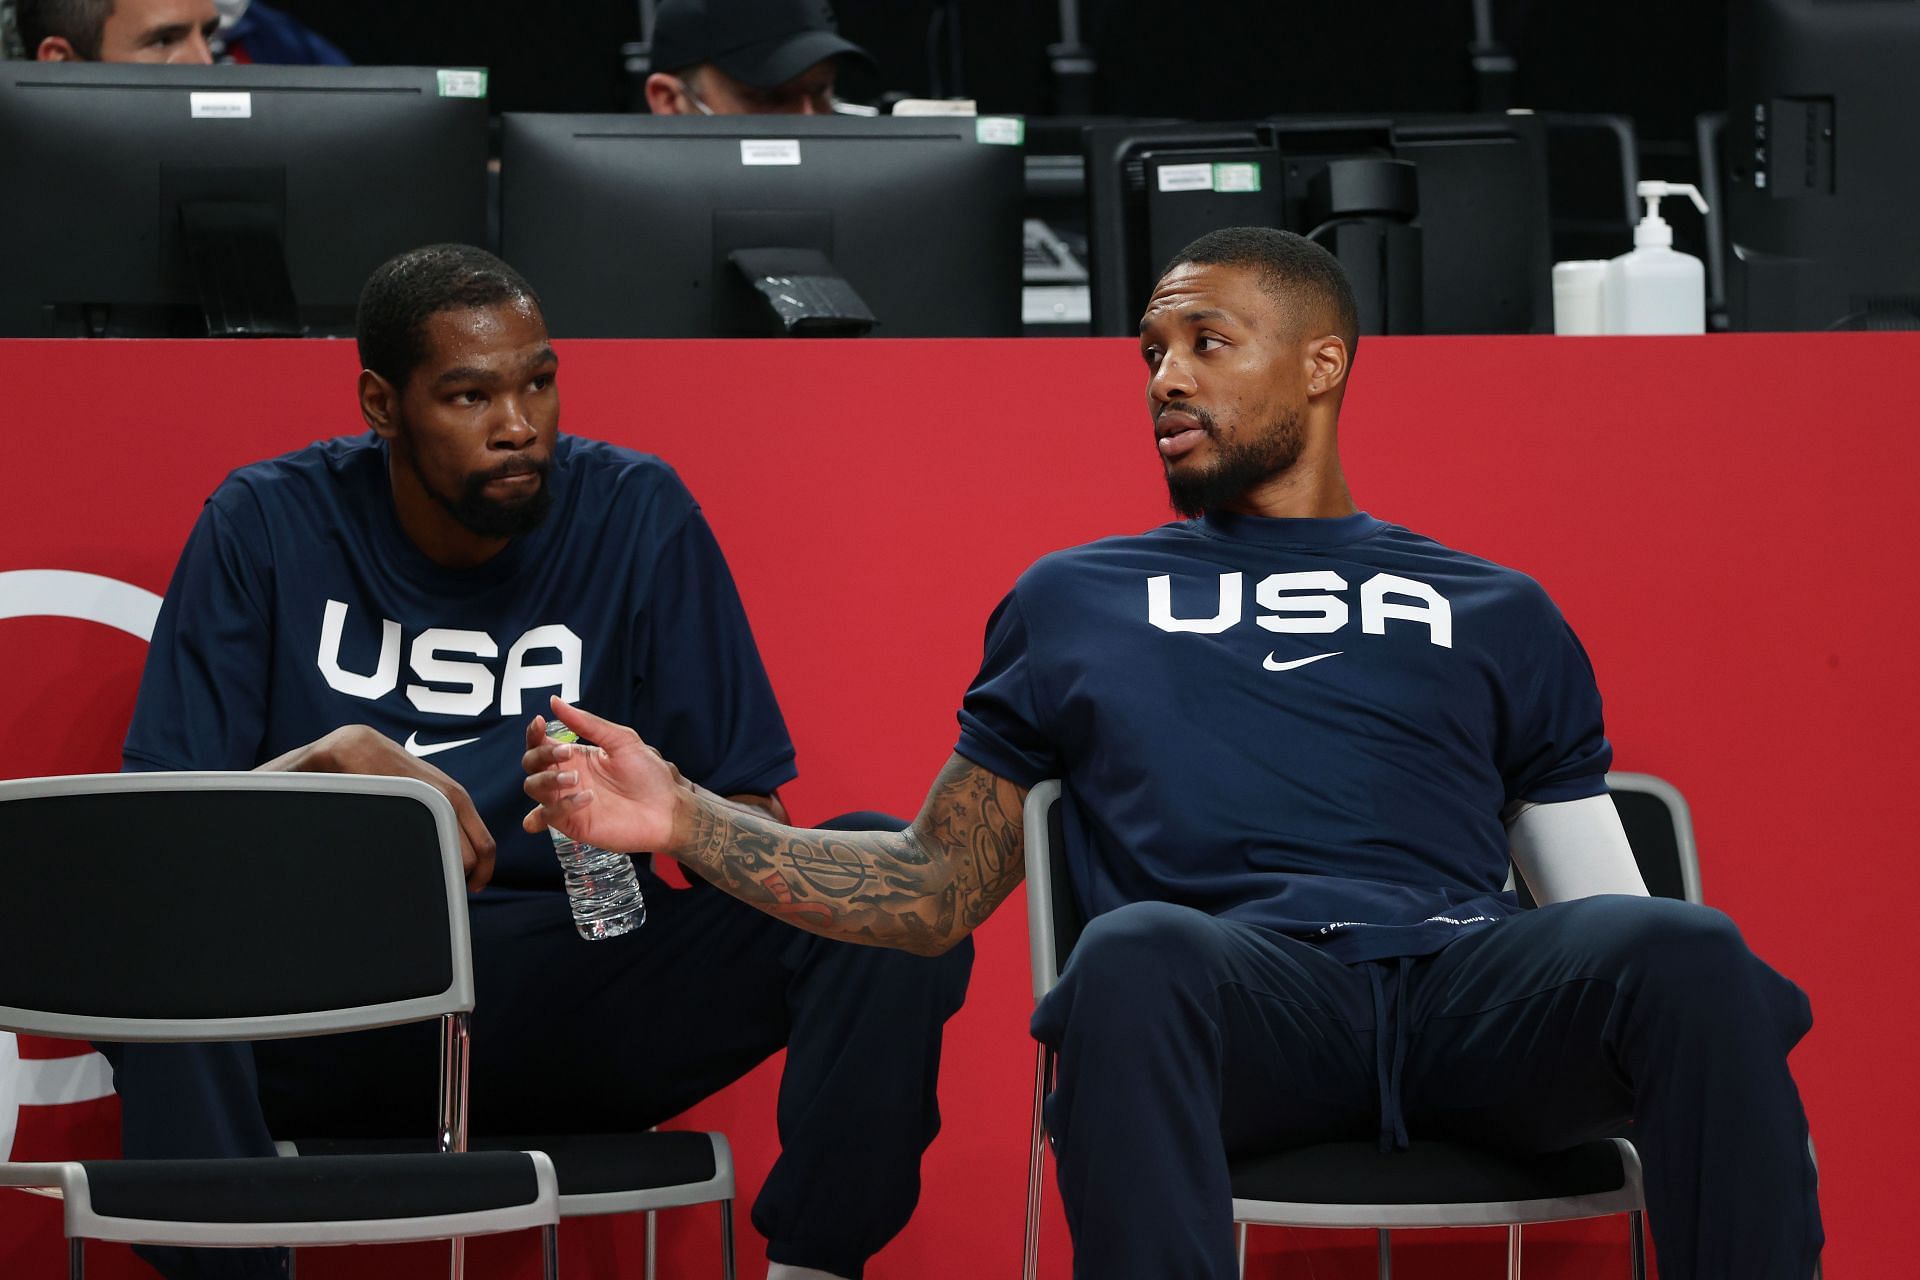 Kevin Durant and Damian Lillard of Team USA at the 2020 Tokyo Olympics